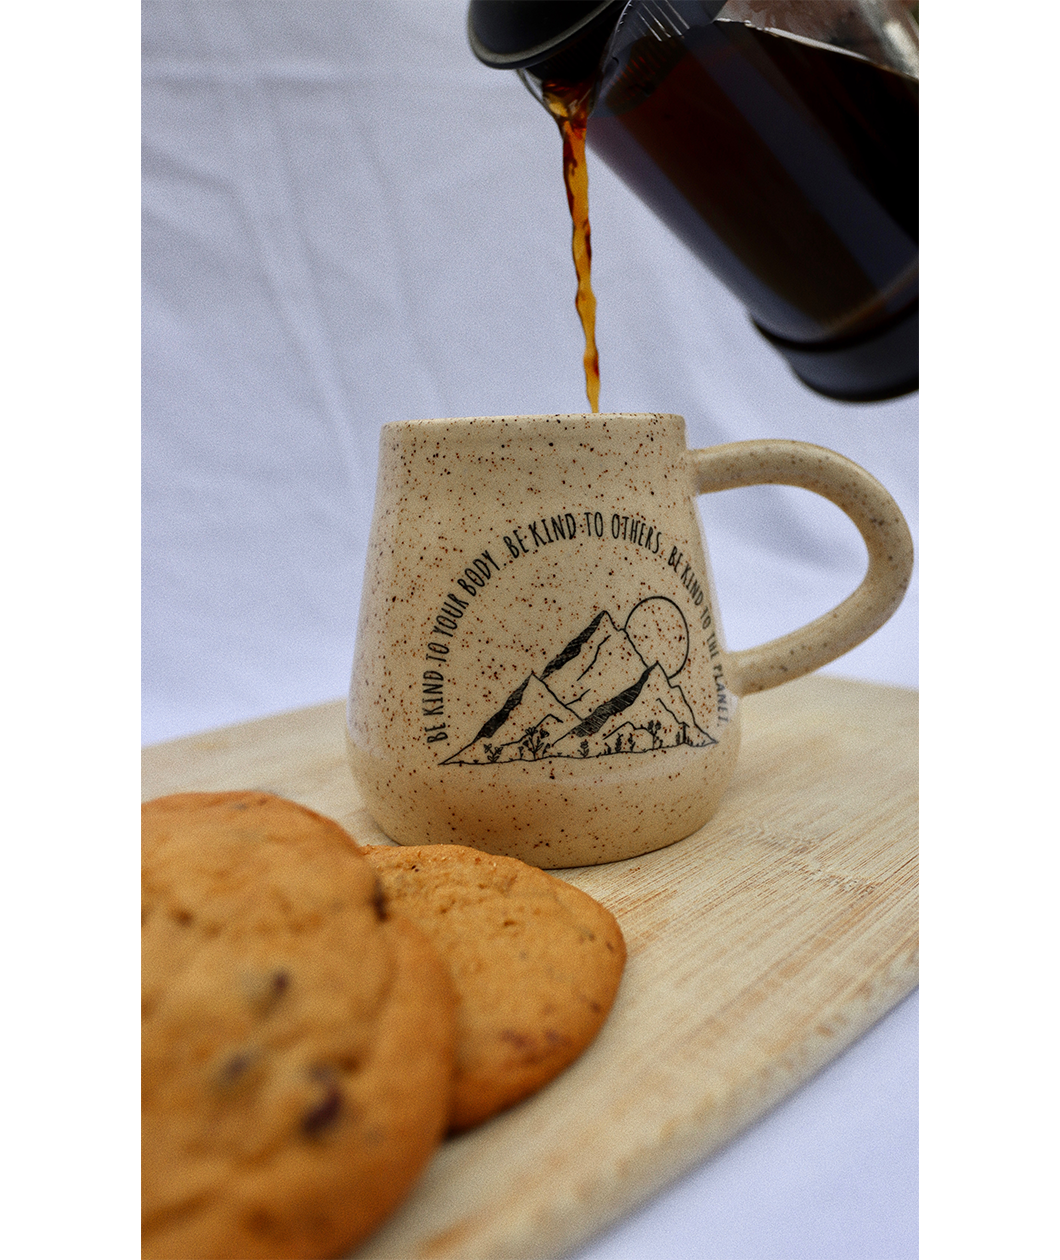 A close up of the Be Kind mug from Sierra Schultzzie on a cutting board with cookies a a french press pouring coffee in the mug. The mug is speckled beige with mountains and a moon. The text curves around the mountains and says "Be kind to your body be kind to others be kind to the planet".